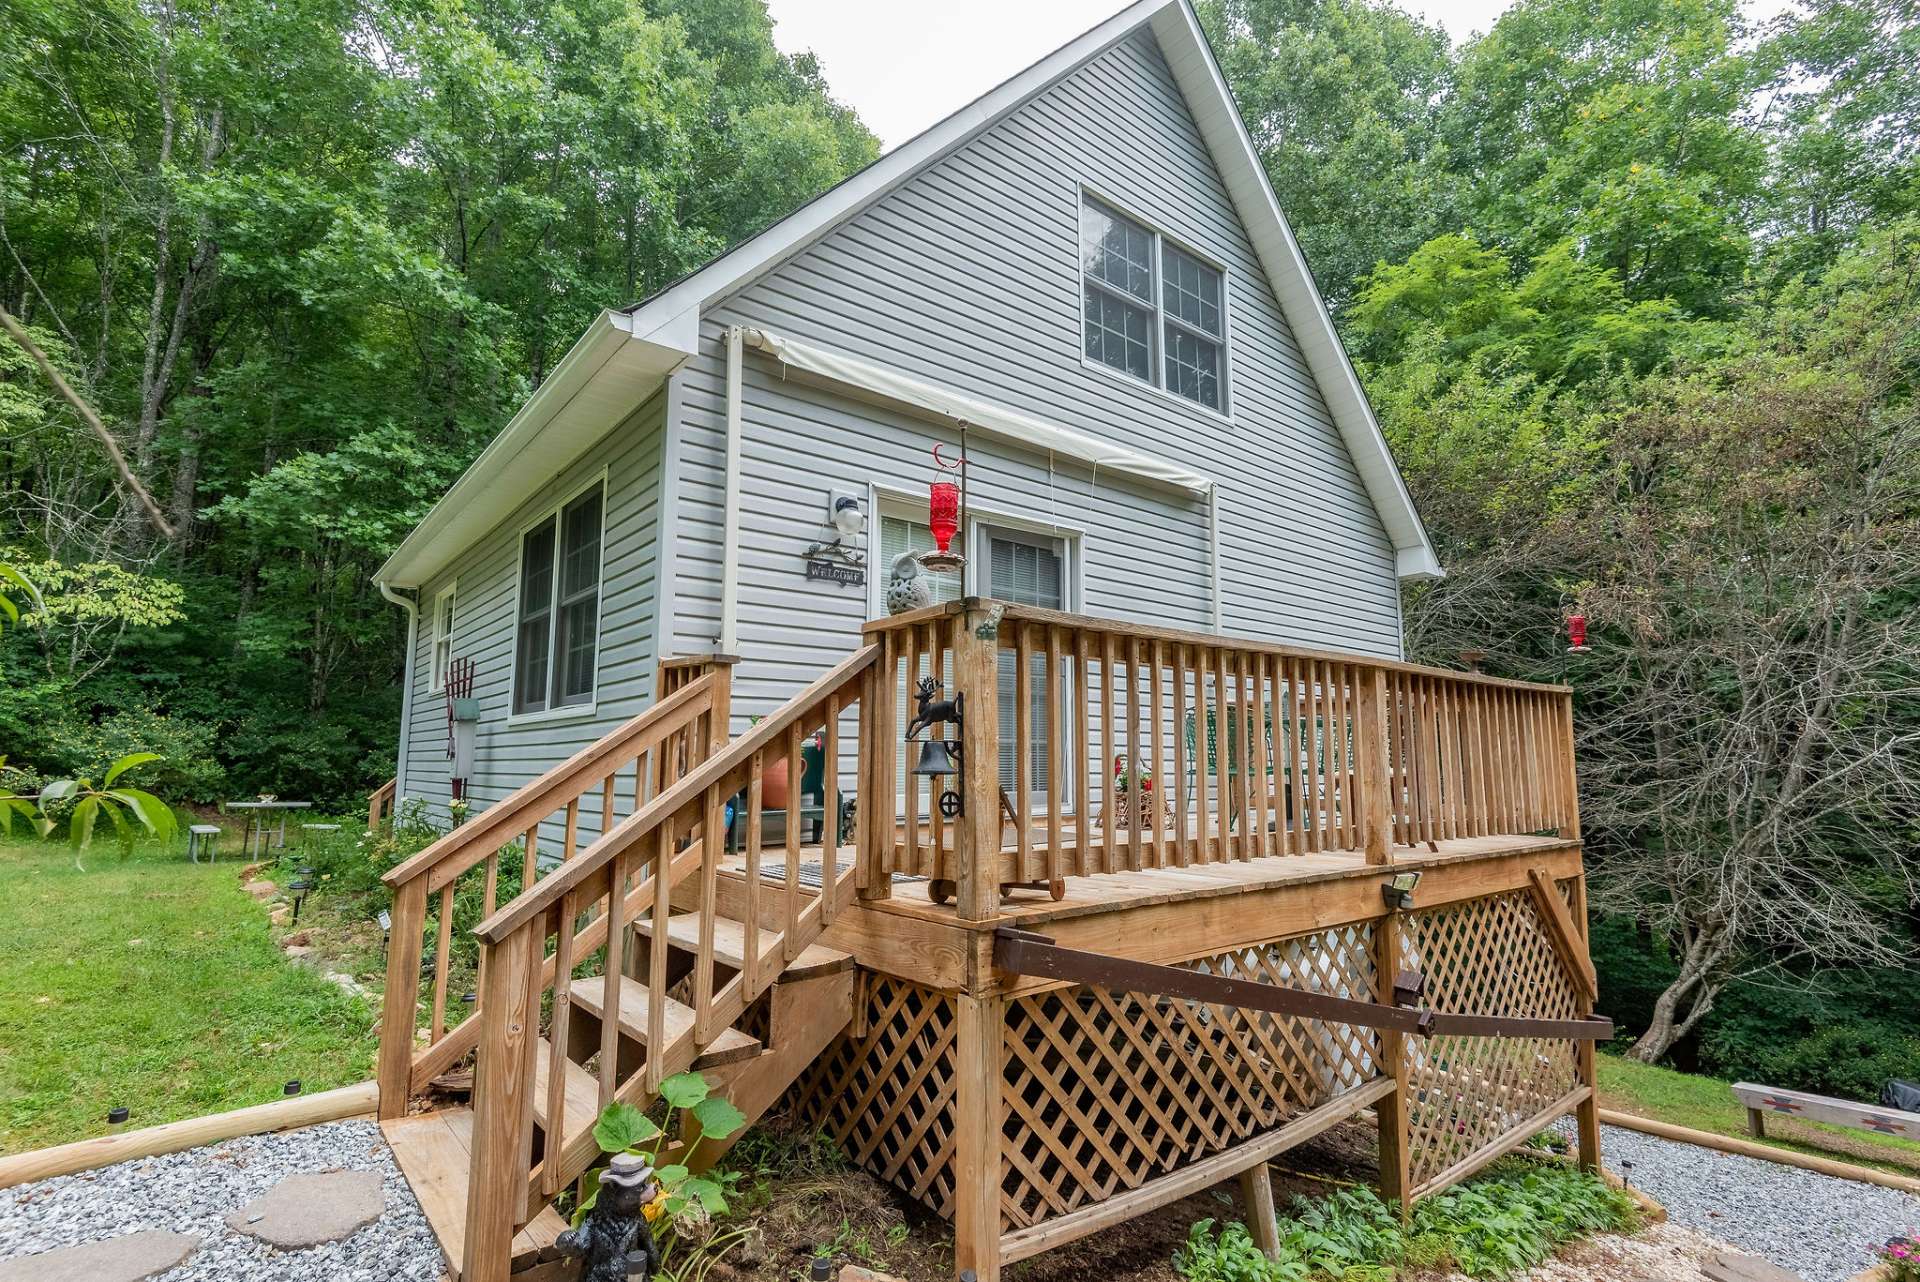 Imagine watching the stars or entertaining family or friends on the large deck overlooking the beautiful yard.